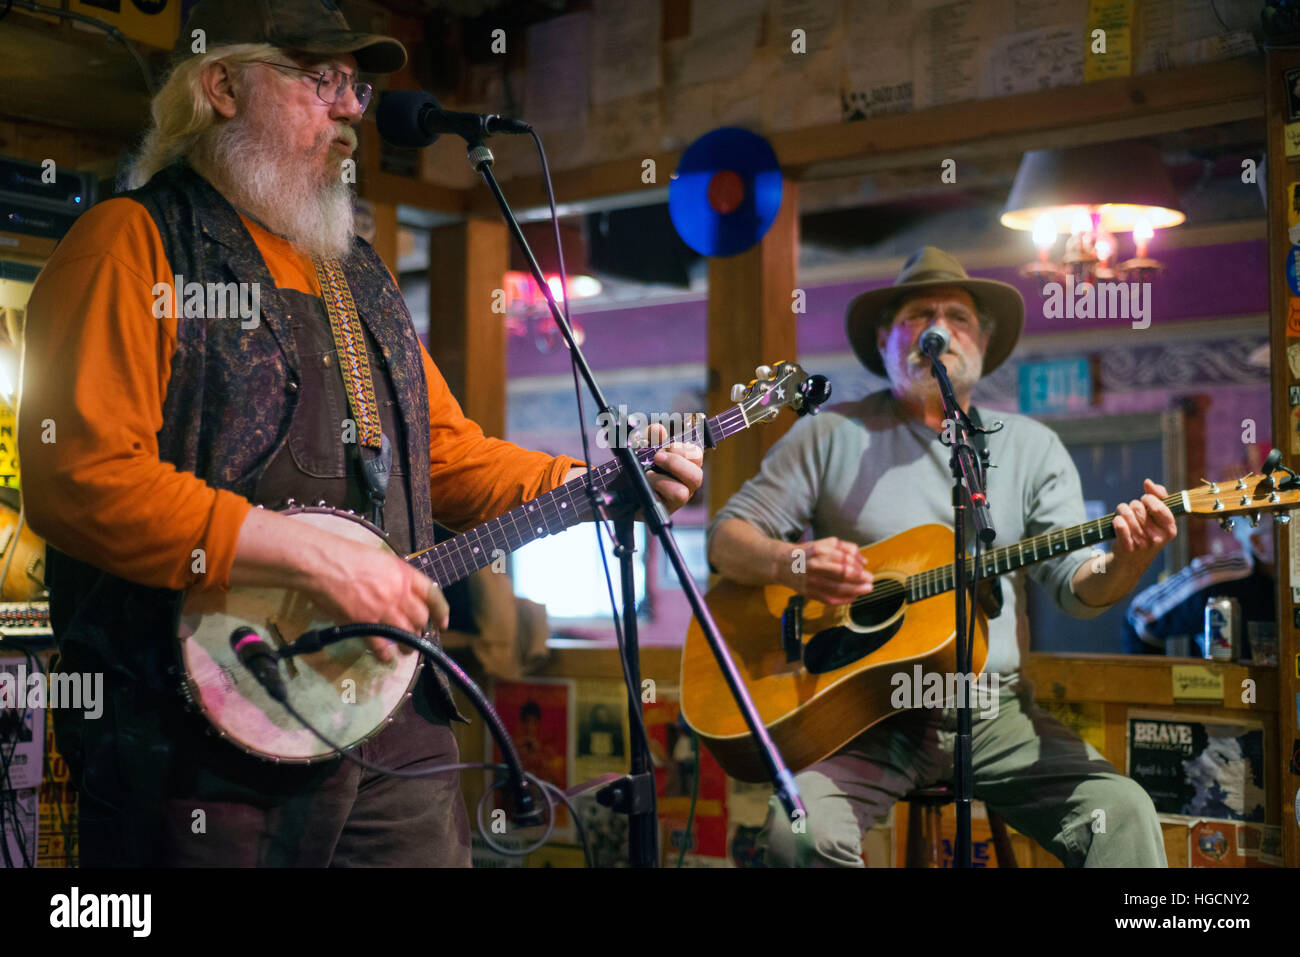 Alaskan Hotel and Bar. Live Country music. The Alaskan Hotel is the best-preserved and oldest operating hotel in Southeast Alaska. The Alaskan Hotel w Stock Photo